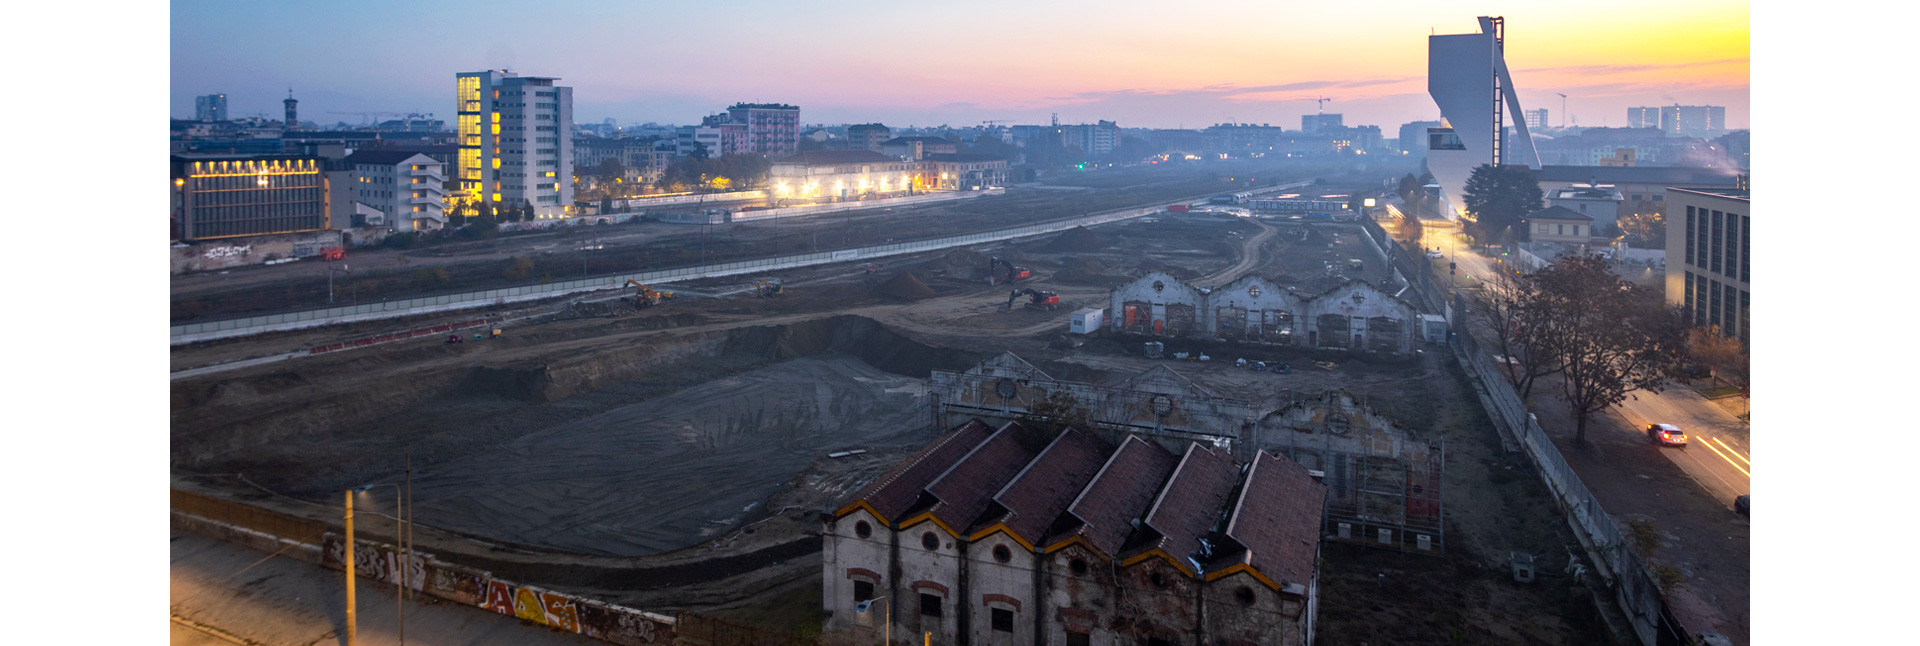 The Milan Cortina 2026 Olympic Village is to be built on a disused railway yard "©COIMA